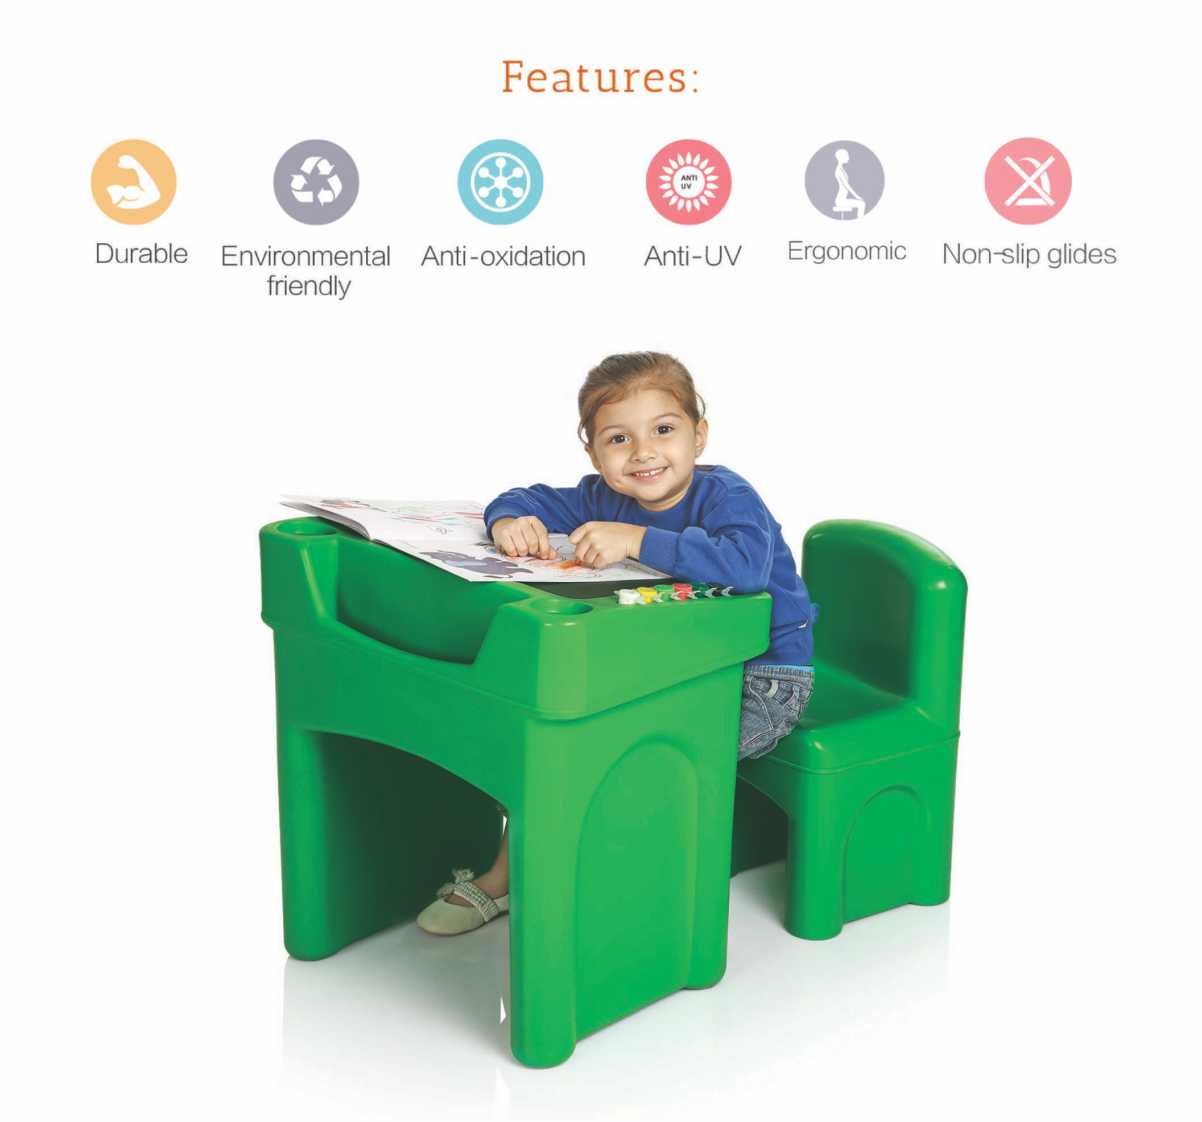 OK Play Little Master Green Chair & Table Set for Kids - FTFF000047